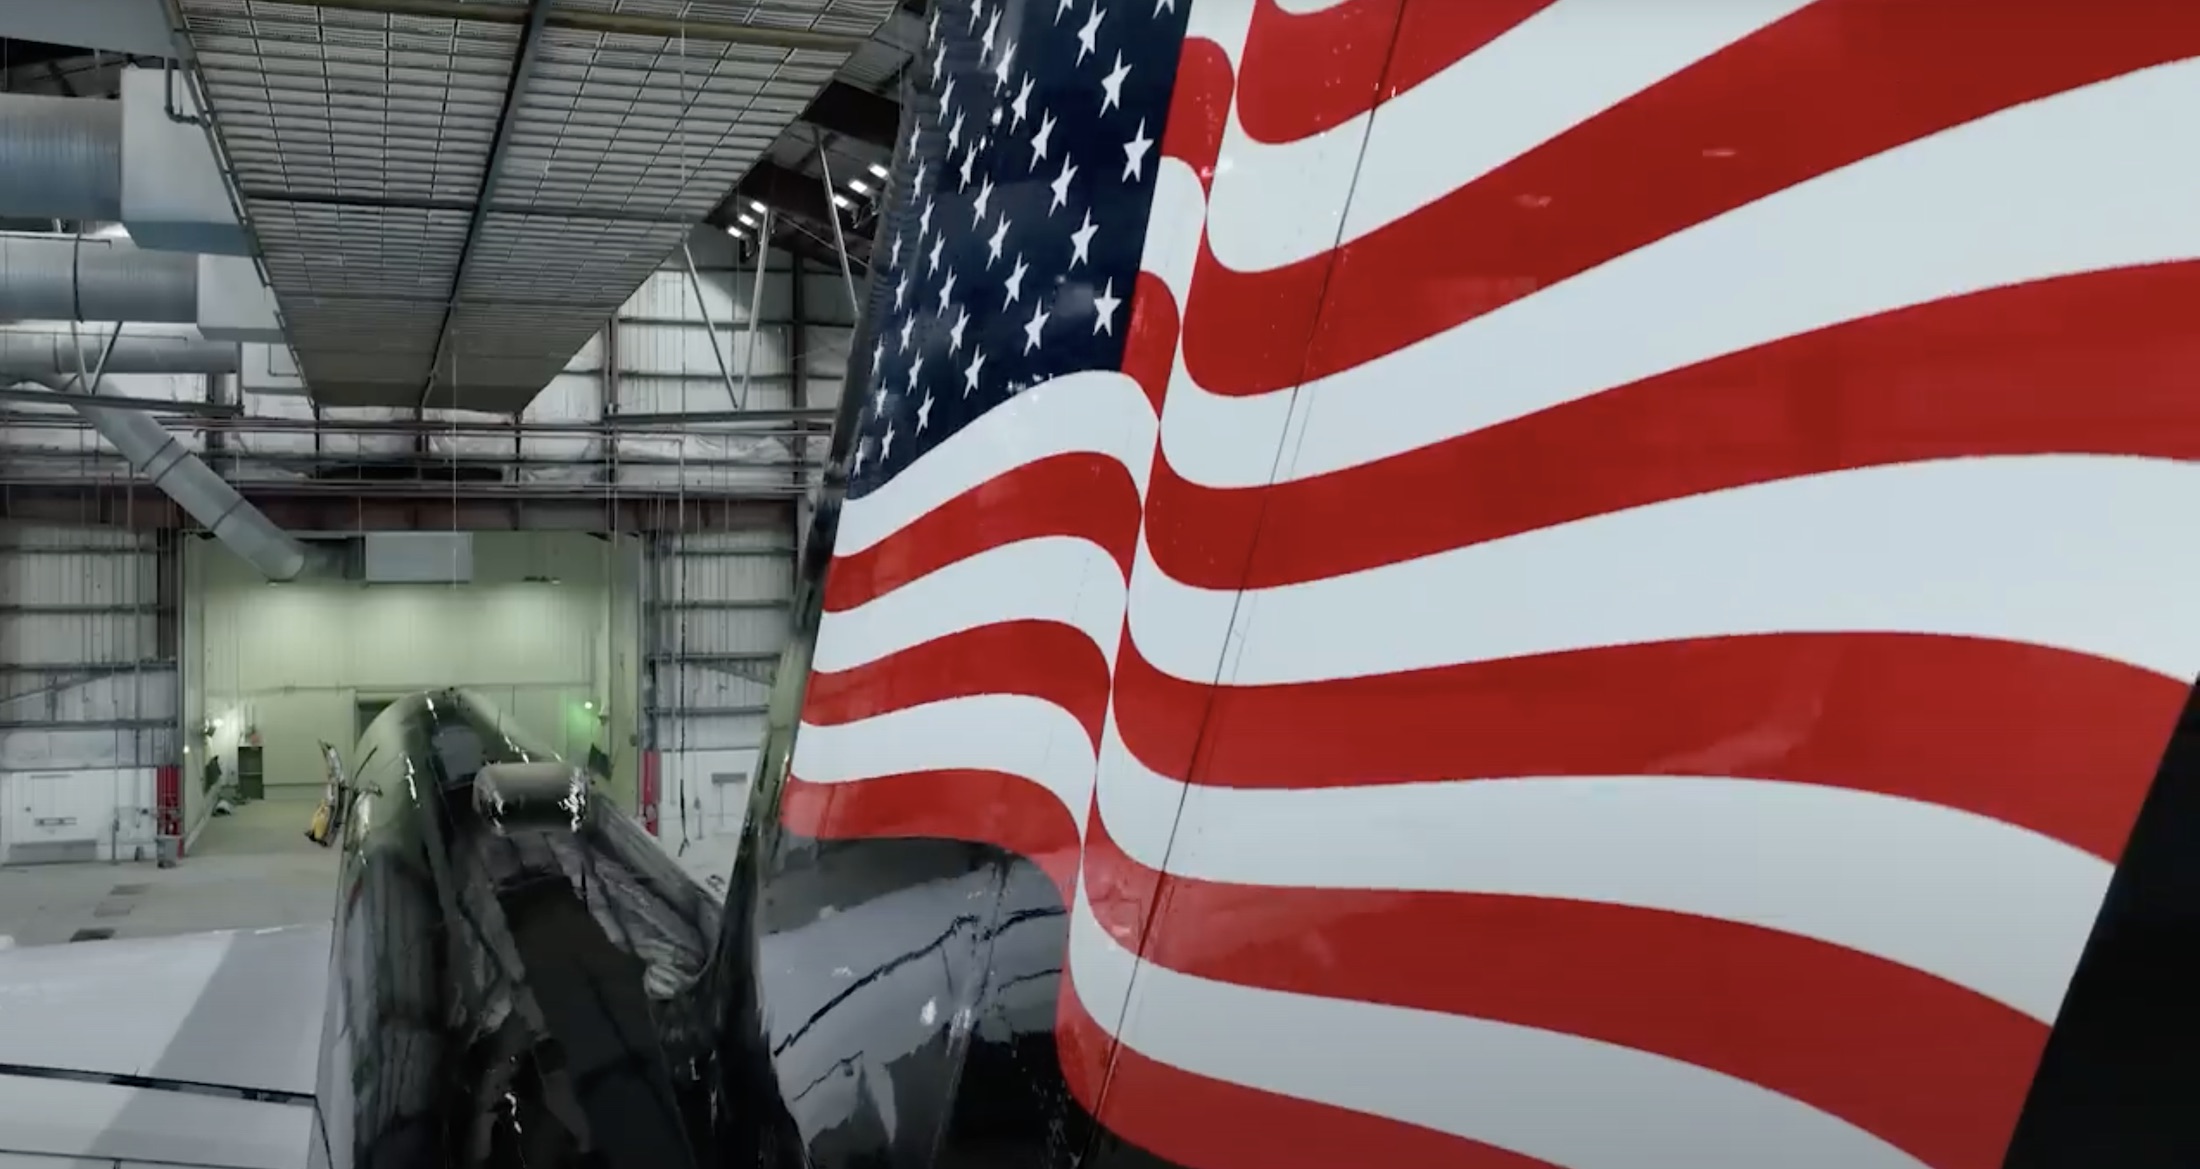 a flag painted on a plane